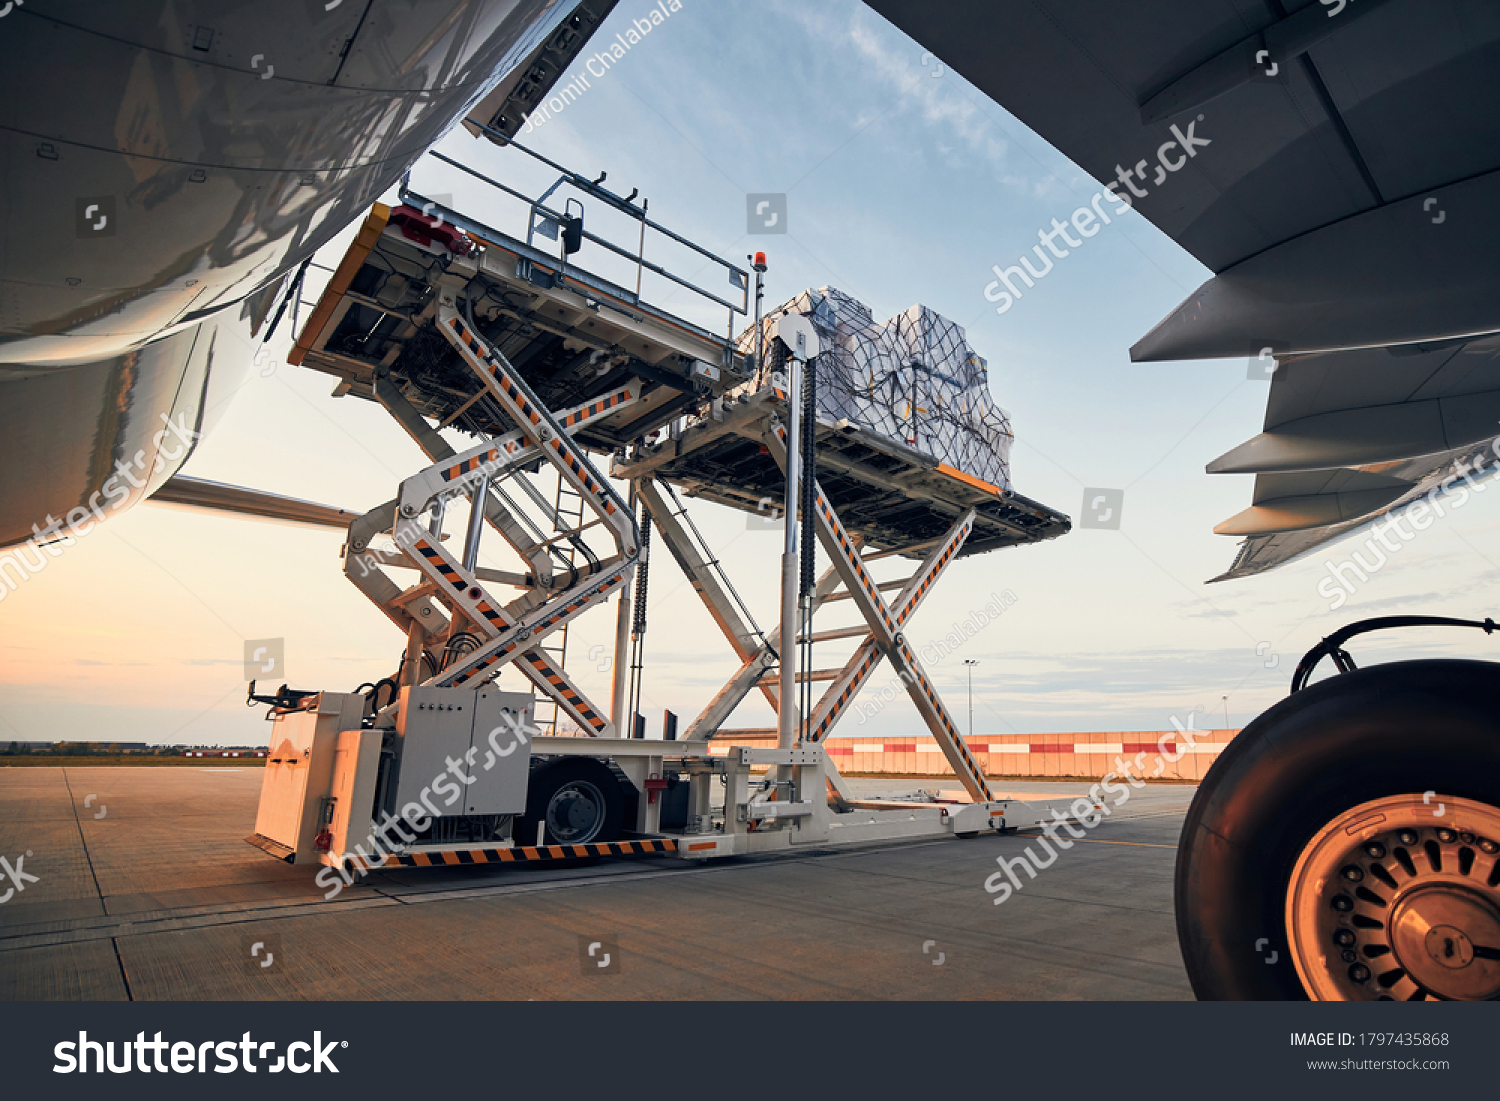 Preparation before flight. Loading of cargo containers to airplane at airport. #1797435868